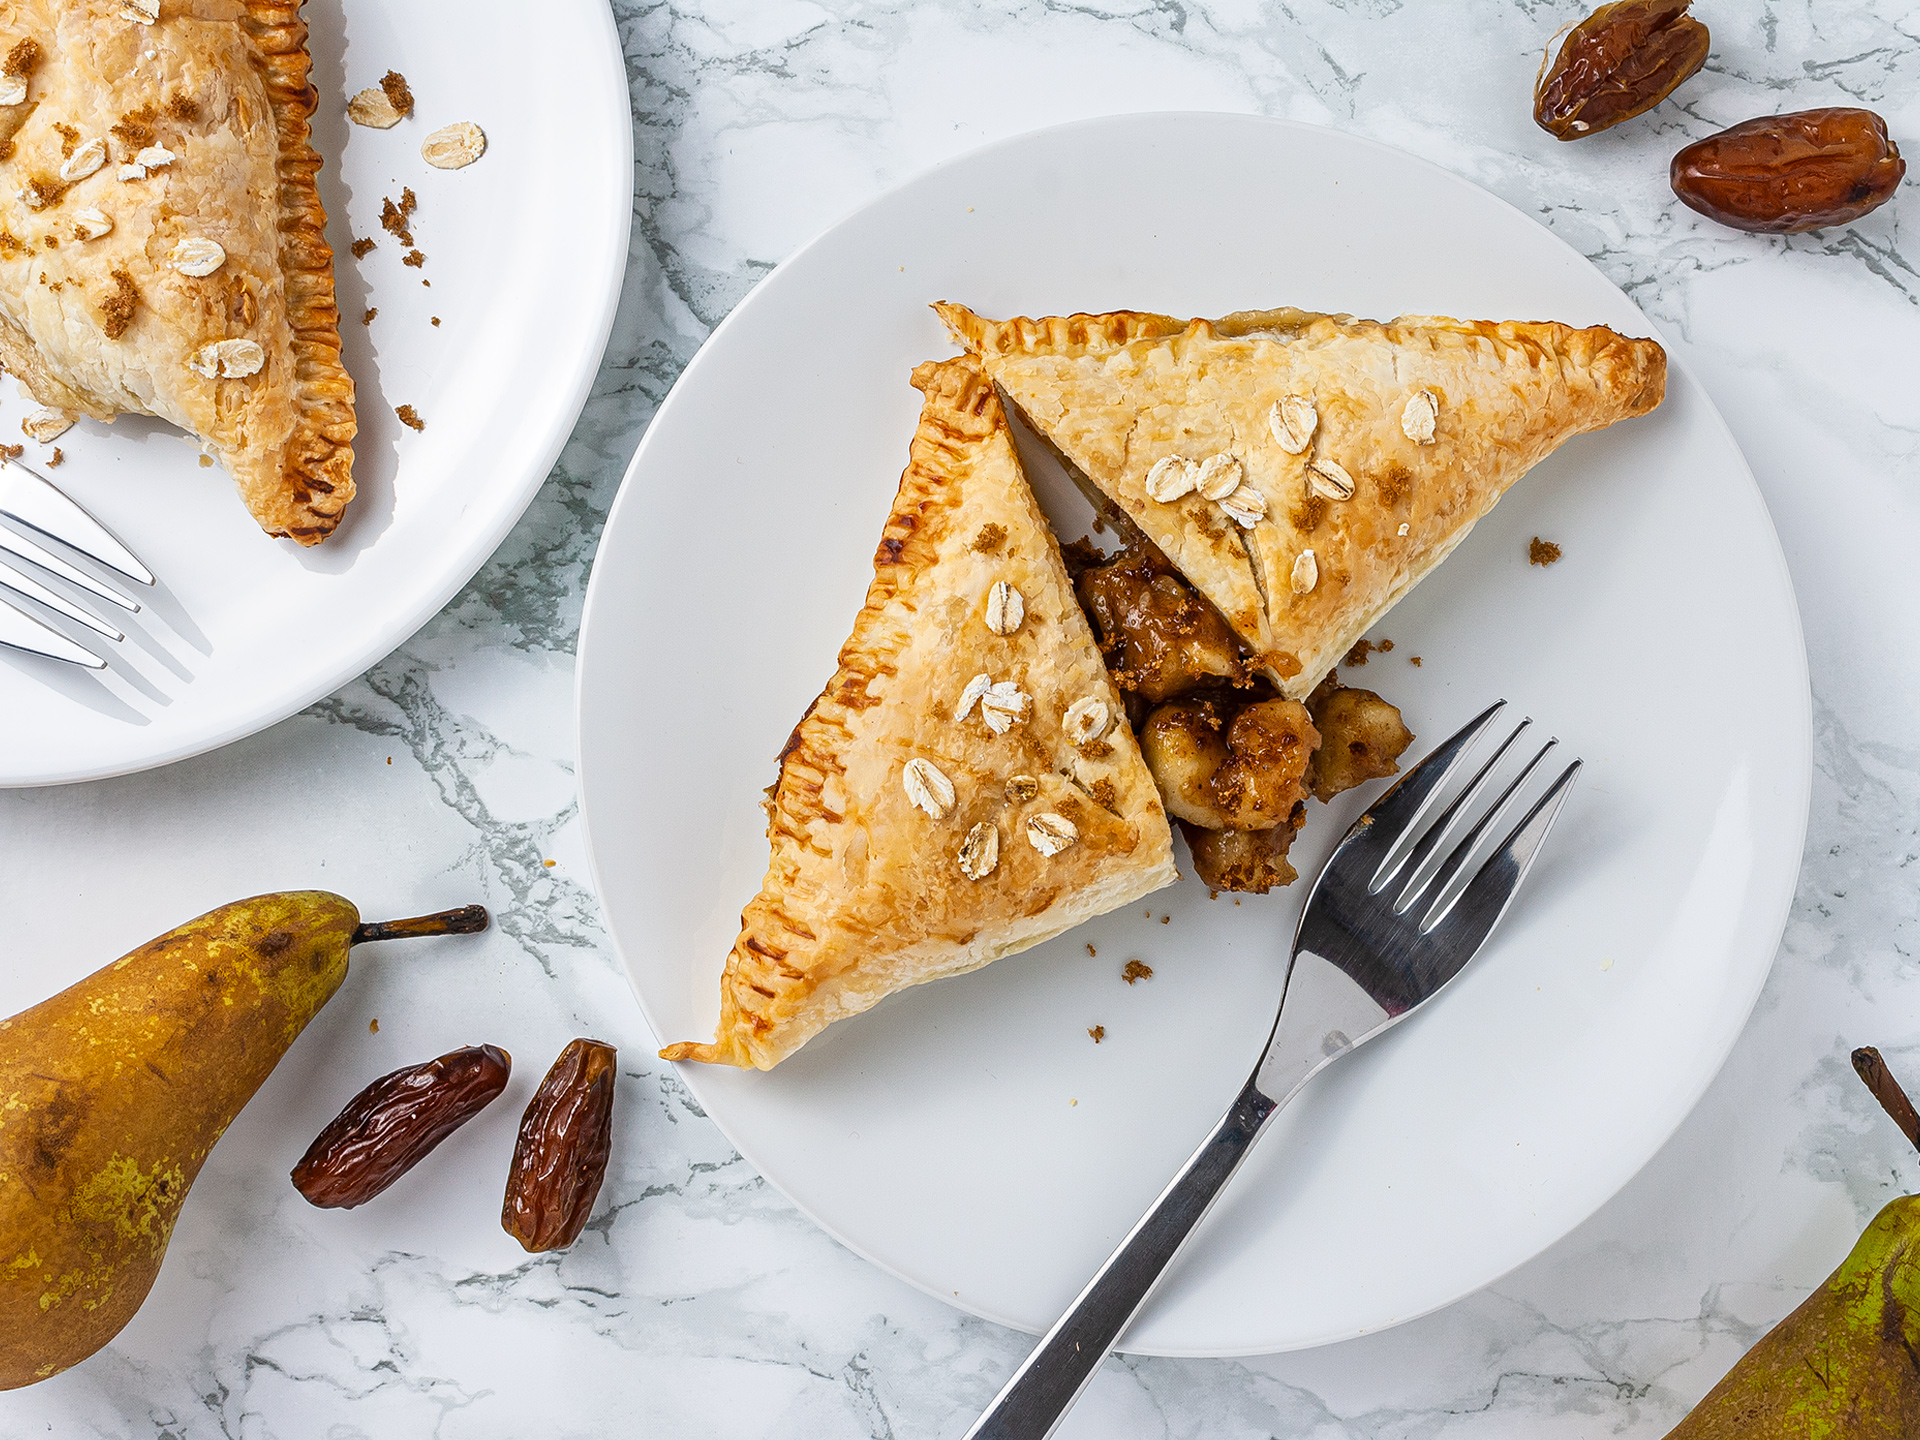 Gluten-Free Pear Turnovers with Dates Recipe